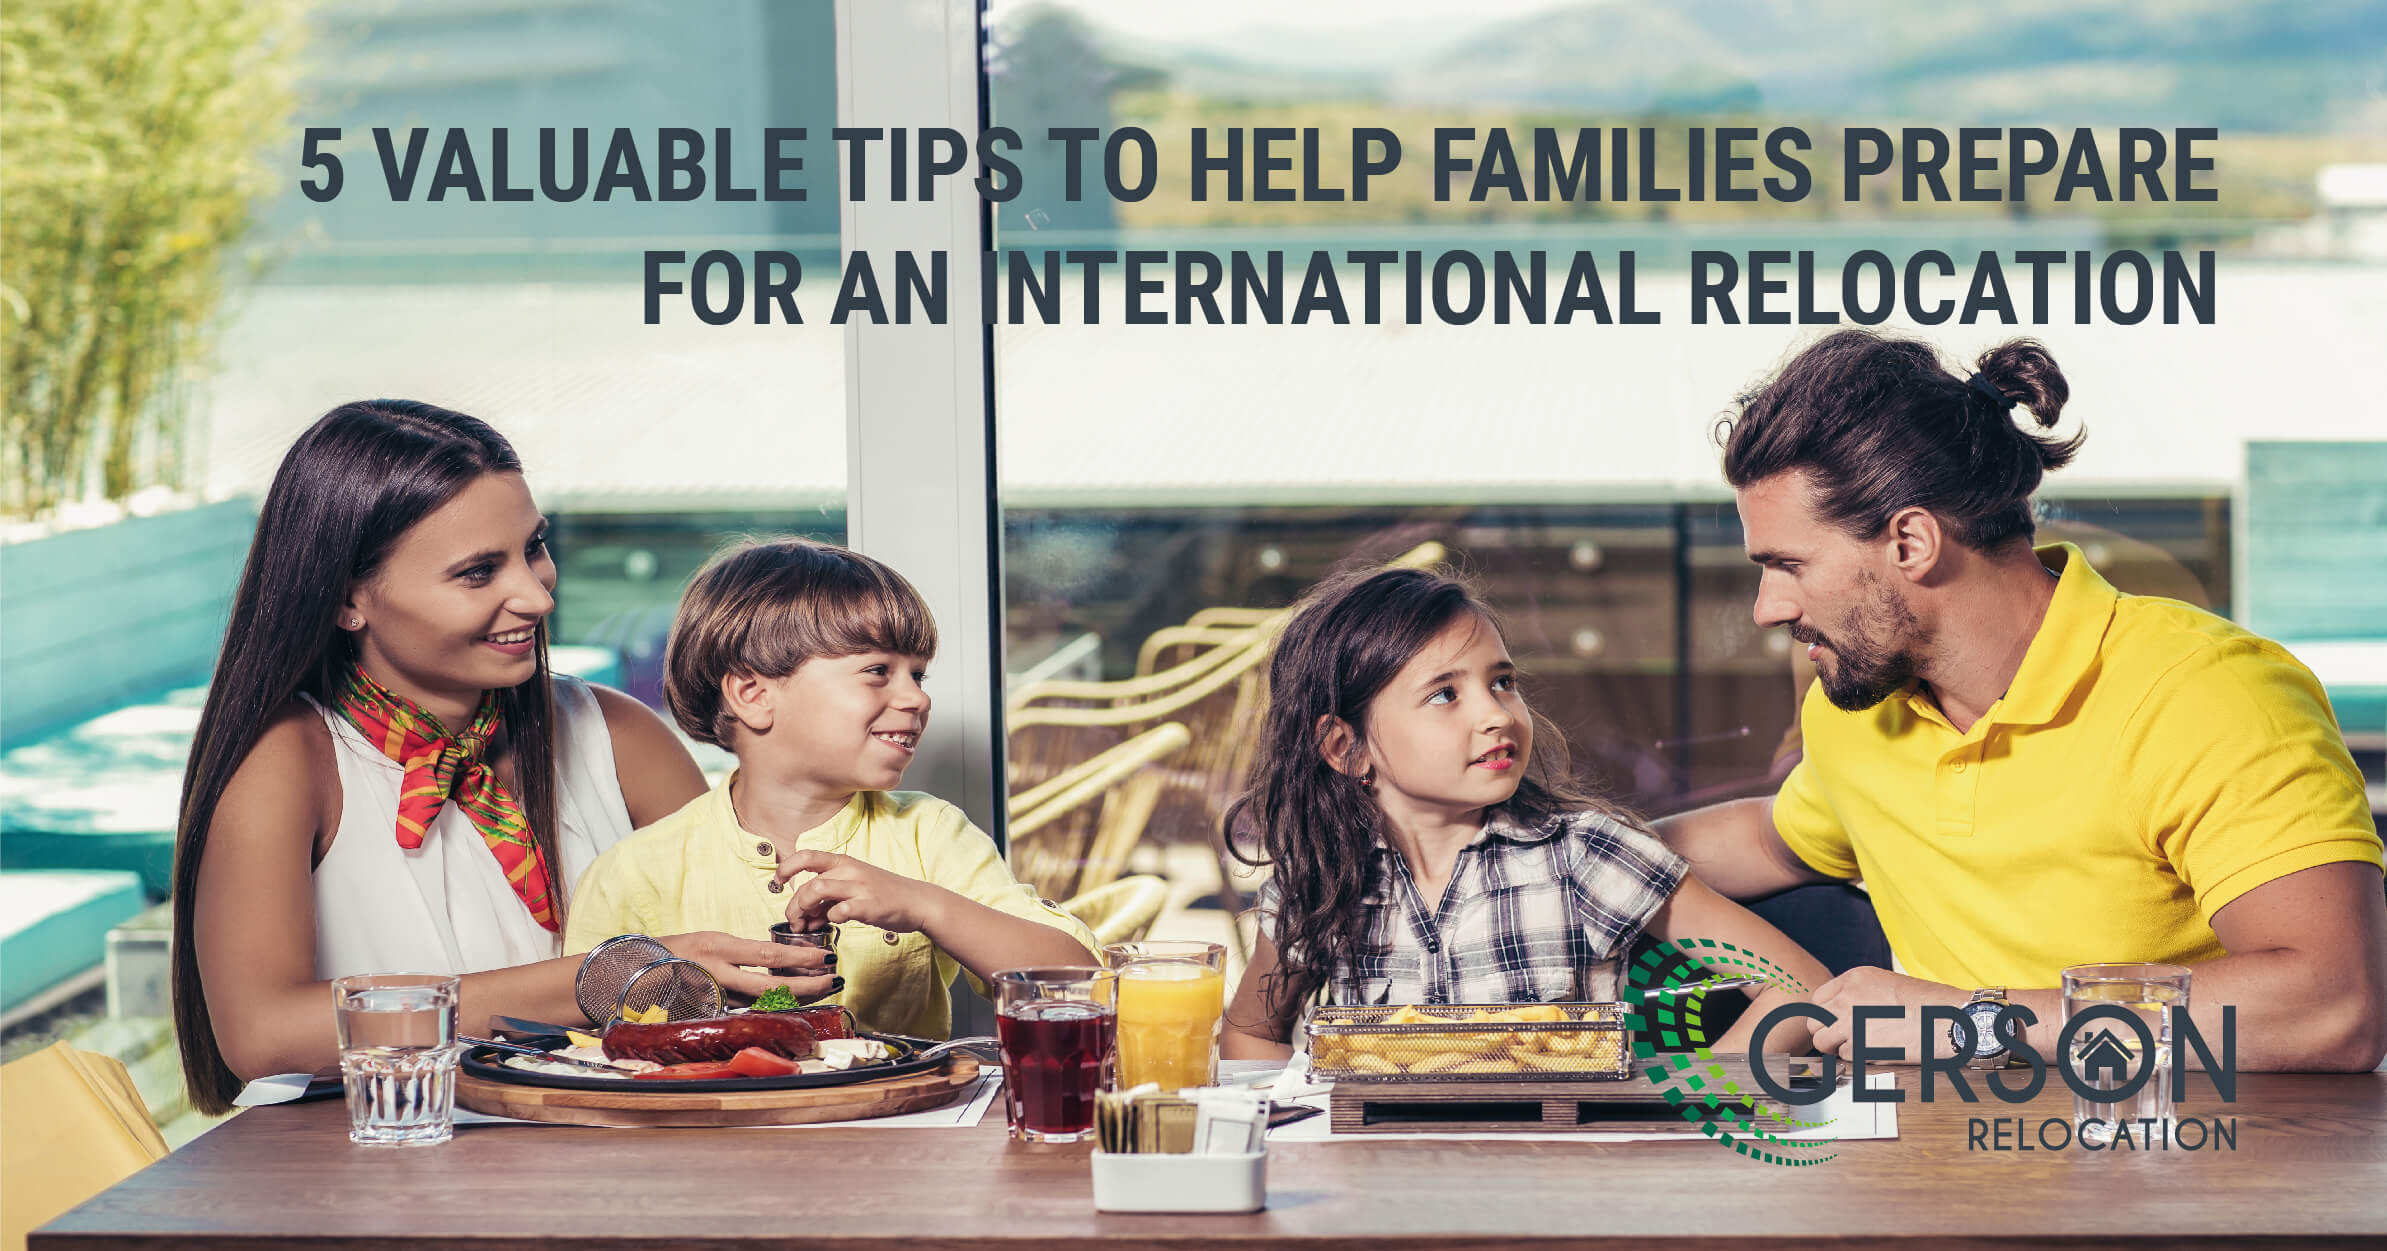 5 Valuable Tips To Help Families Prepare For An International Relocation